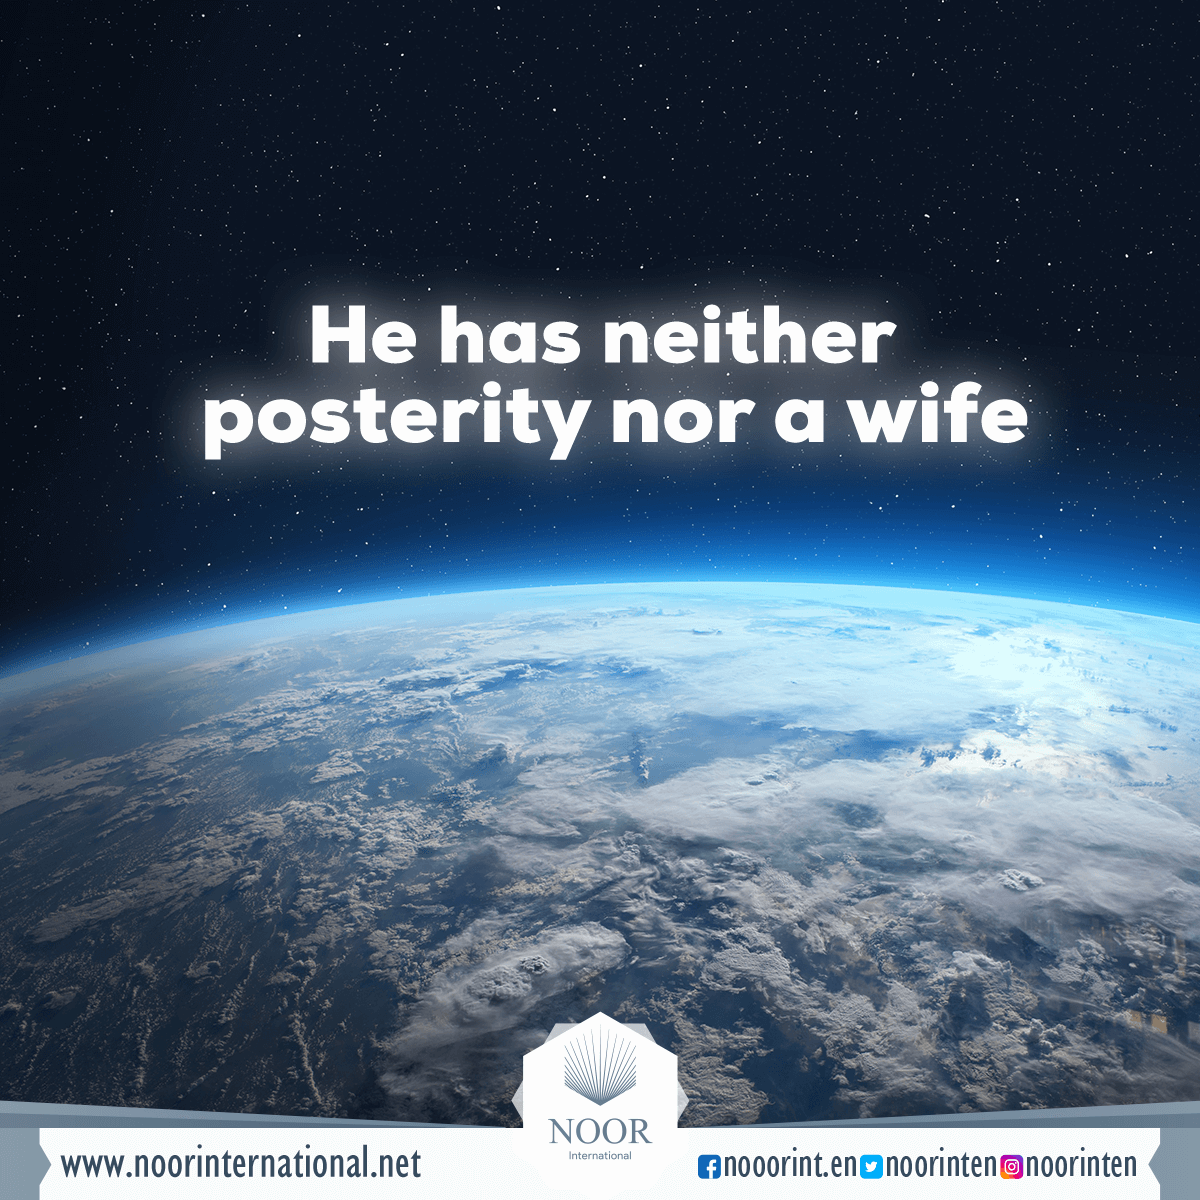 He has neither posterity nor a wife.